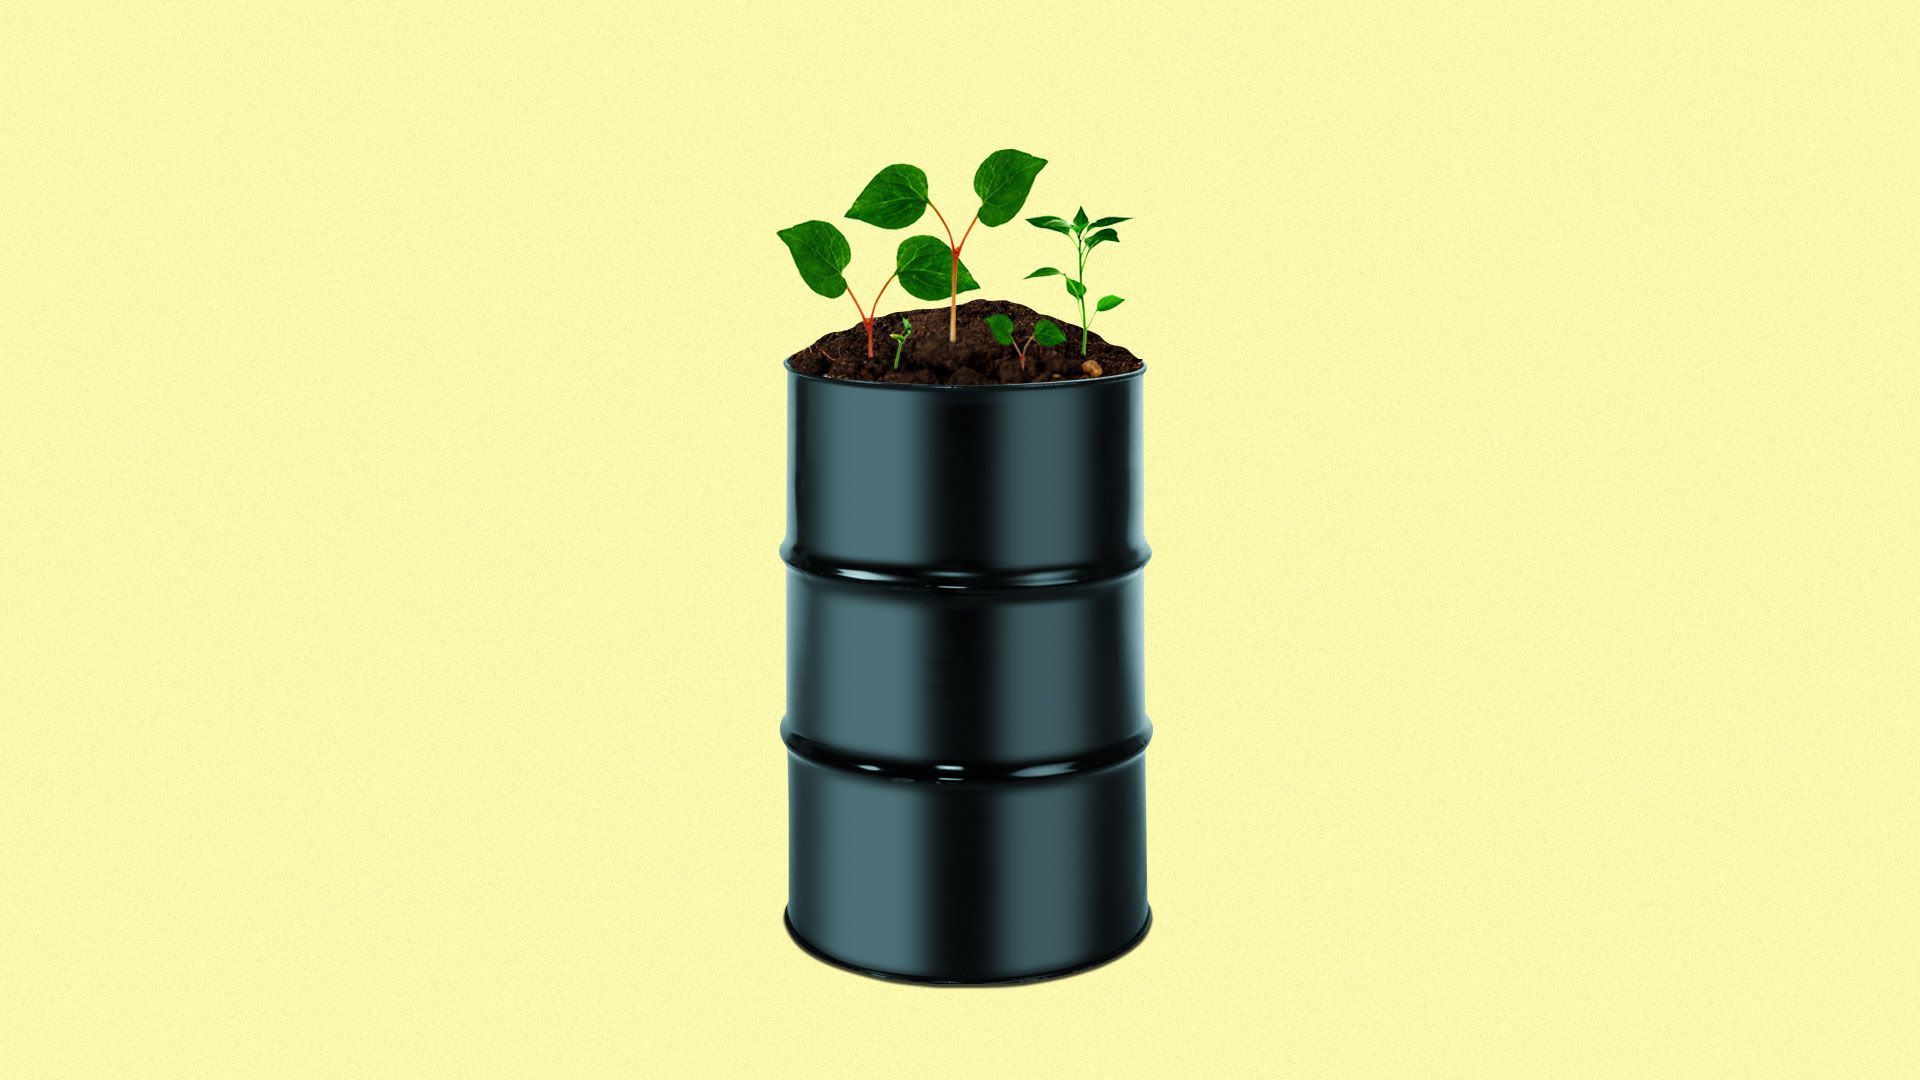 Illustration of plants sprouting from an oil barrel